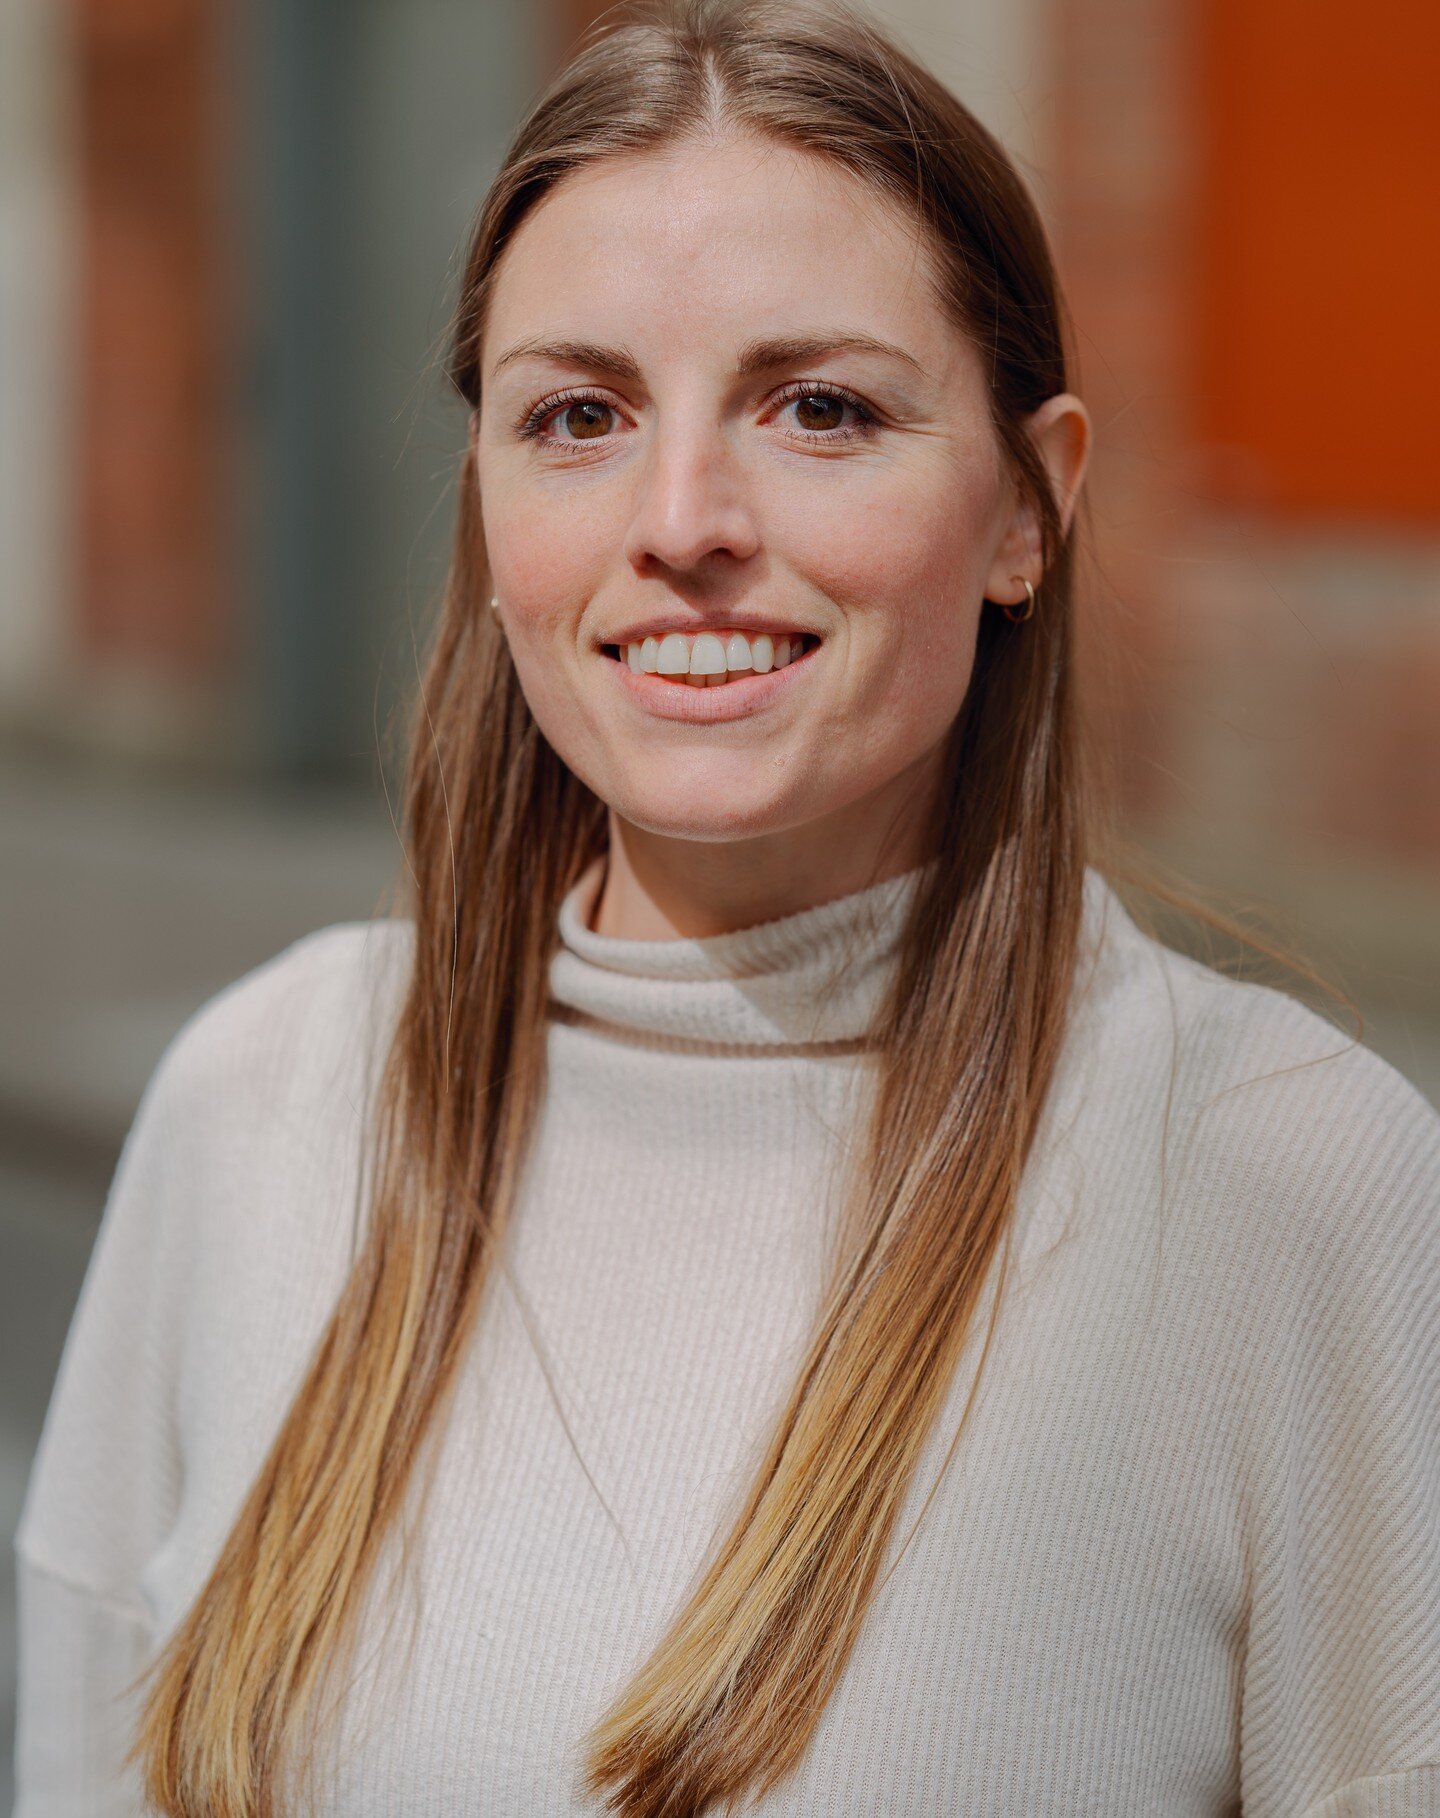 A big welcome to our new Tech Recruiter @jennifer_pelley! 🤩

Jennifer has previously studied organizational psychology and moved to Sweden from Missouri to play professional football for Djurg&aring;rden. She's most recently been working in the fint